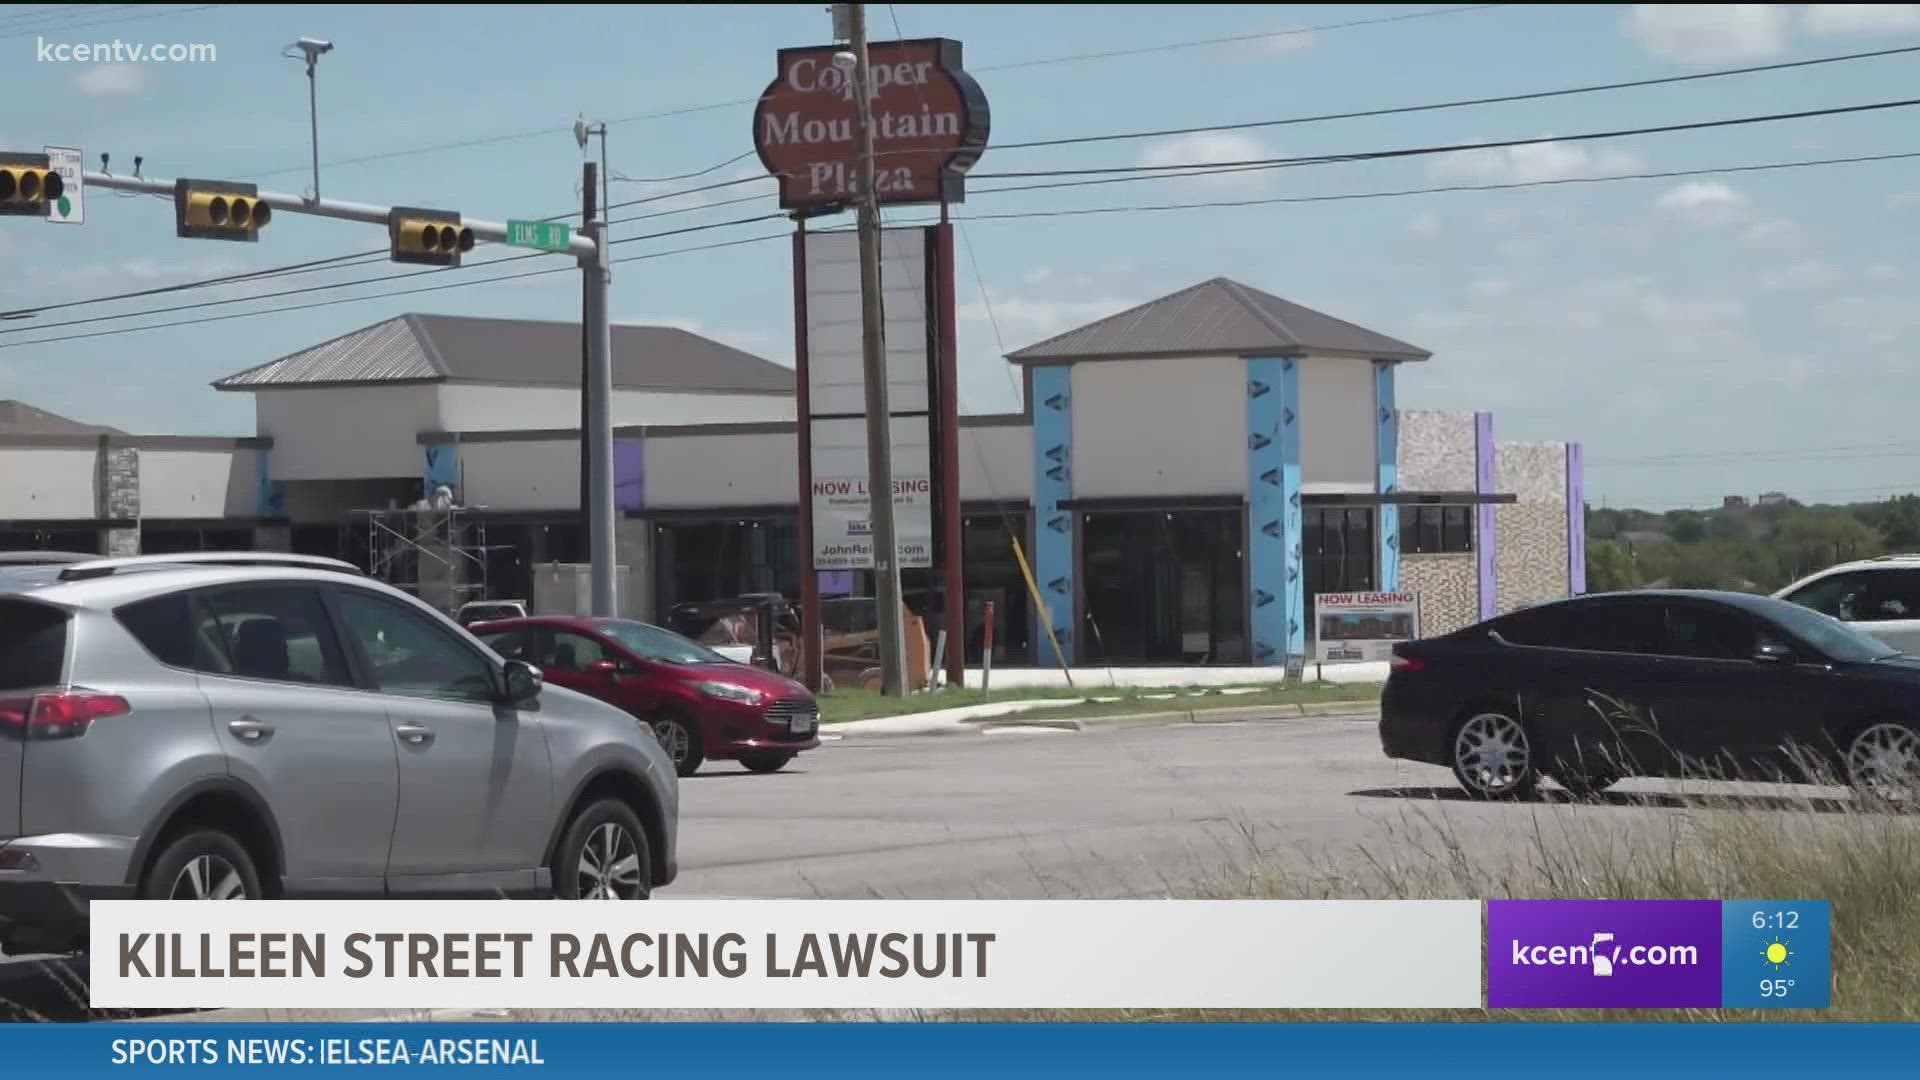 Family members were left severely injured following a crash in Feb. 2020 and are now suing a nightclub, street racing organization and several individuals.